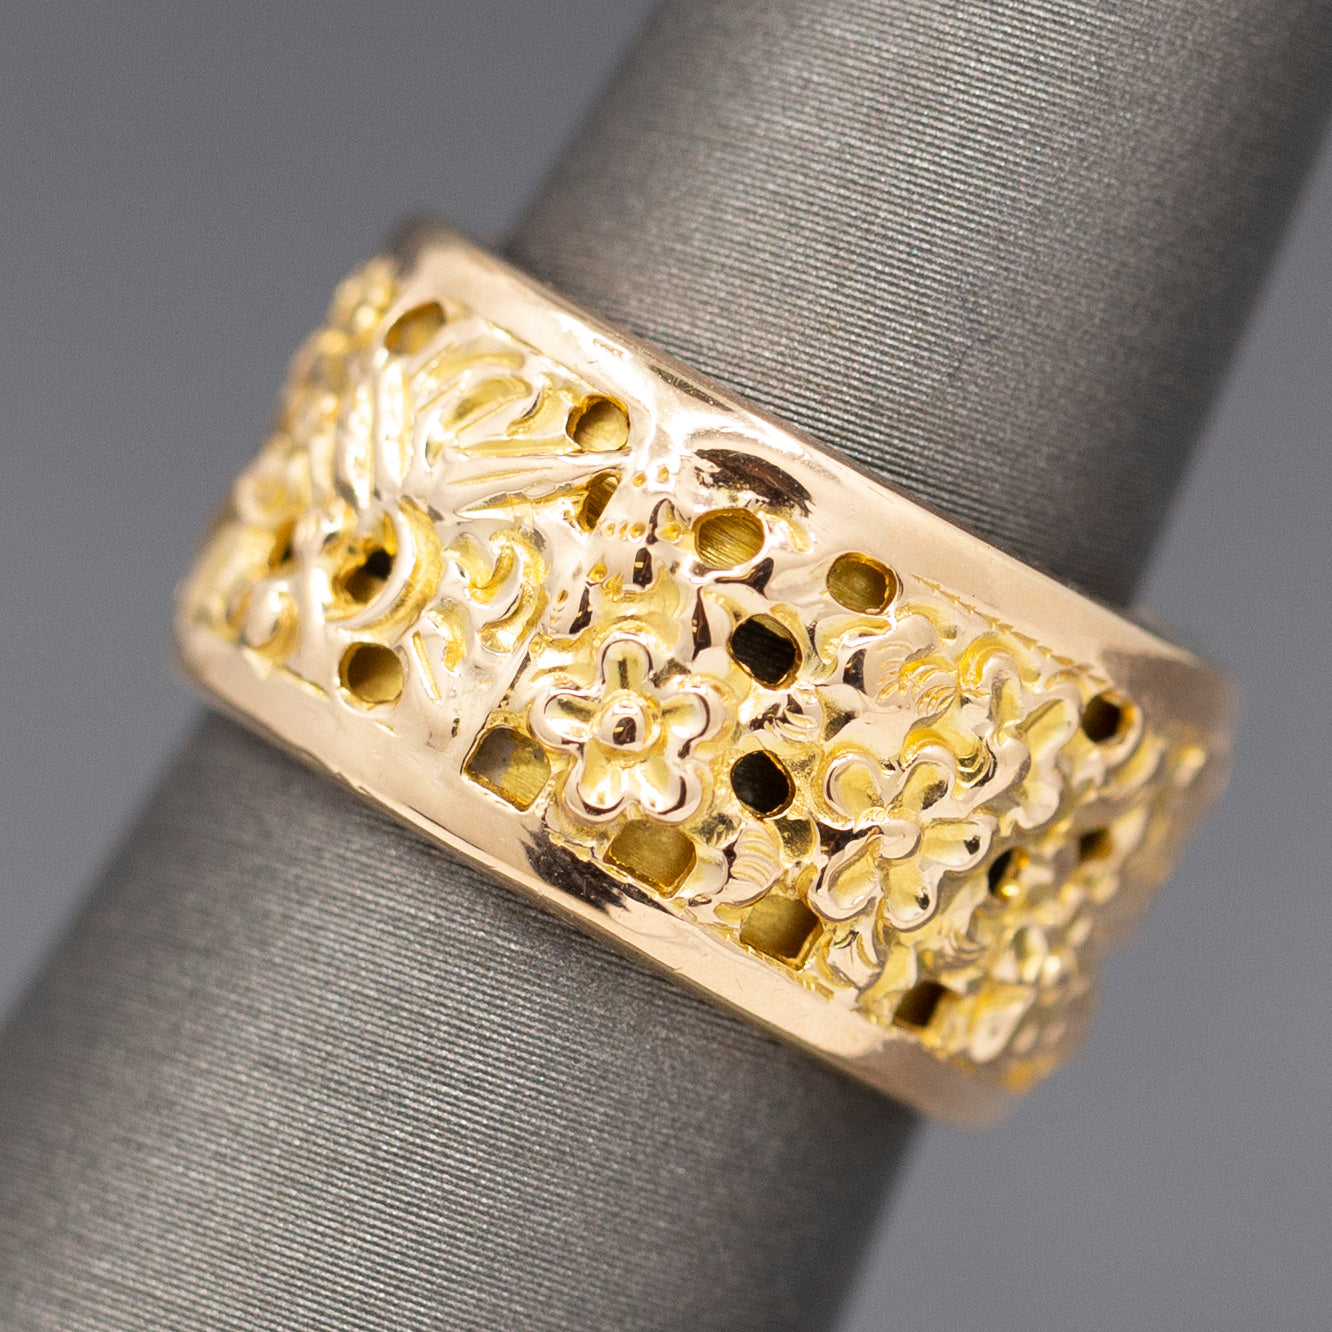 Exceptional Wide Floral Design and Pierced Eternity Band Ring in 18k Yellow Gold